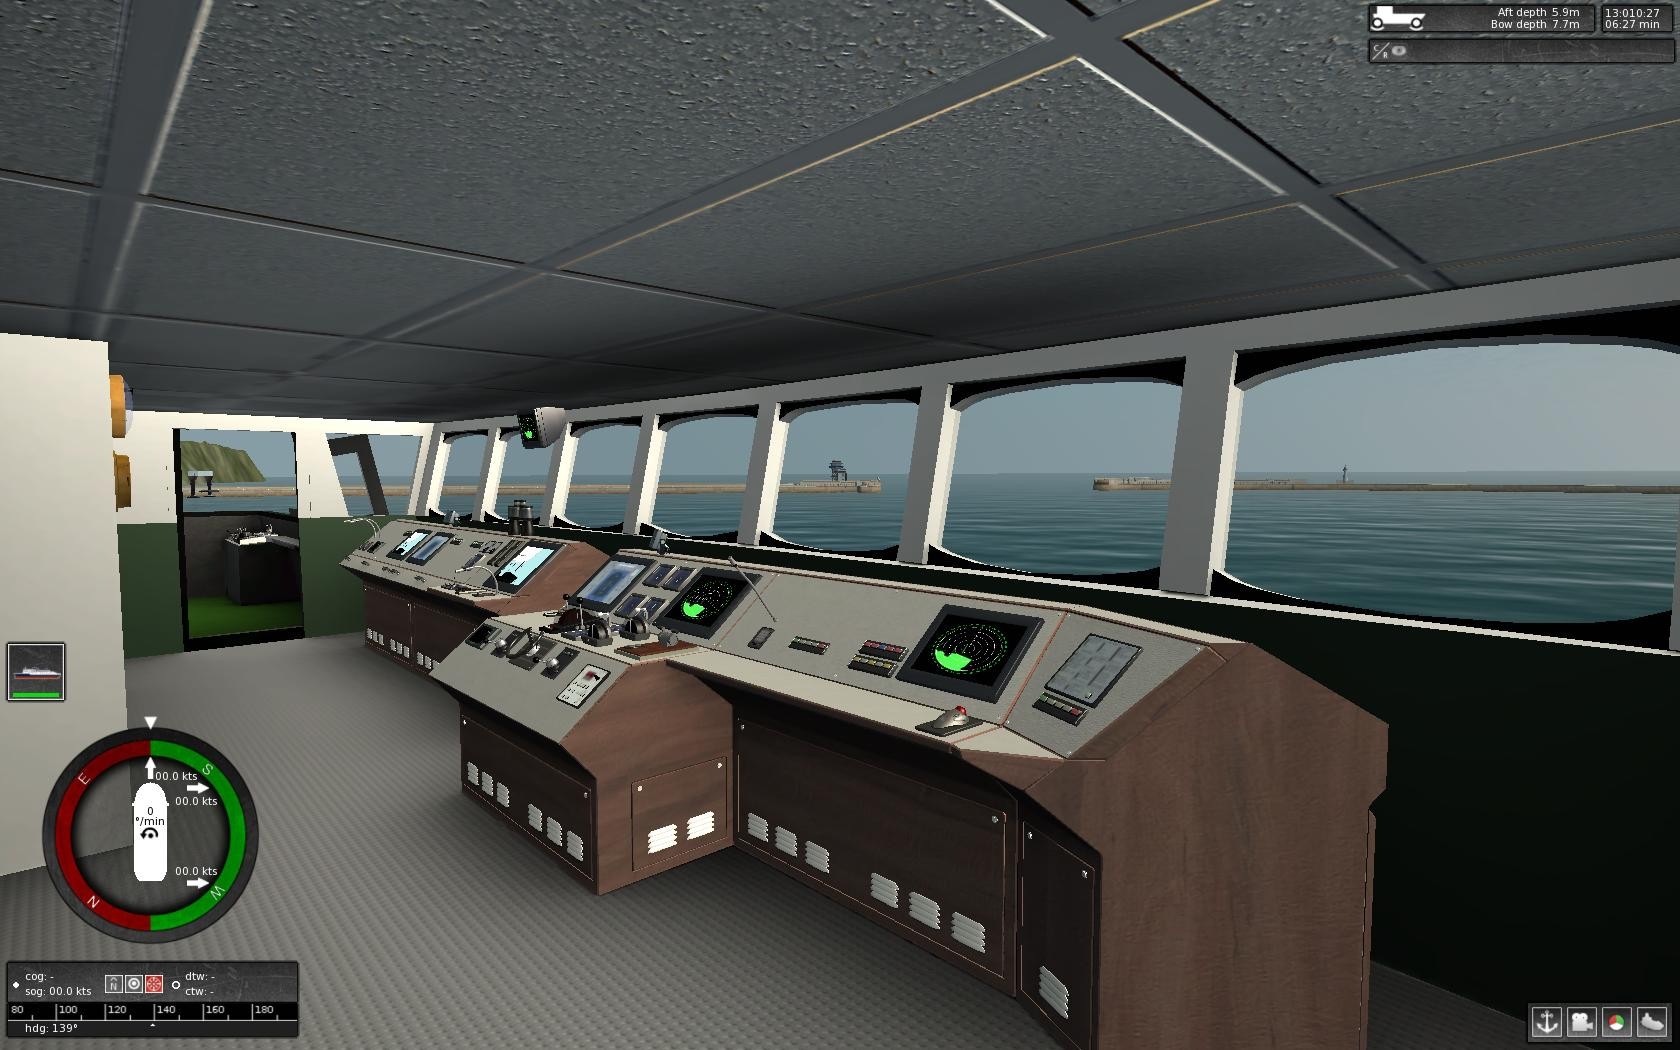 buy-ship-simulator-extremes-ferry-pack-dlc-steam-key-instant-delivery-steam-cd-key